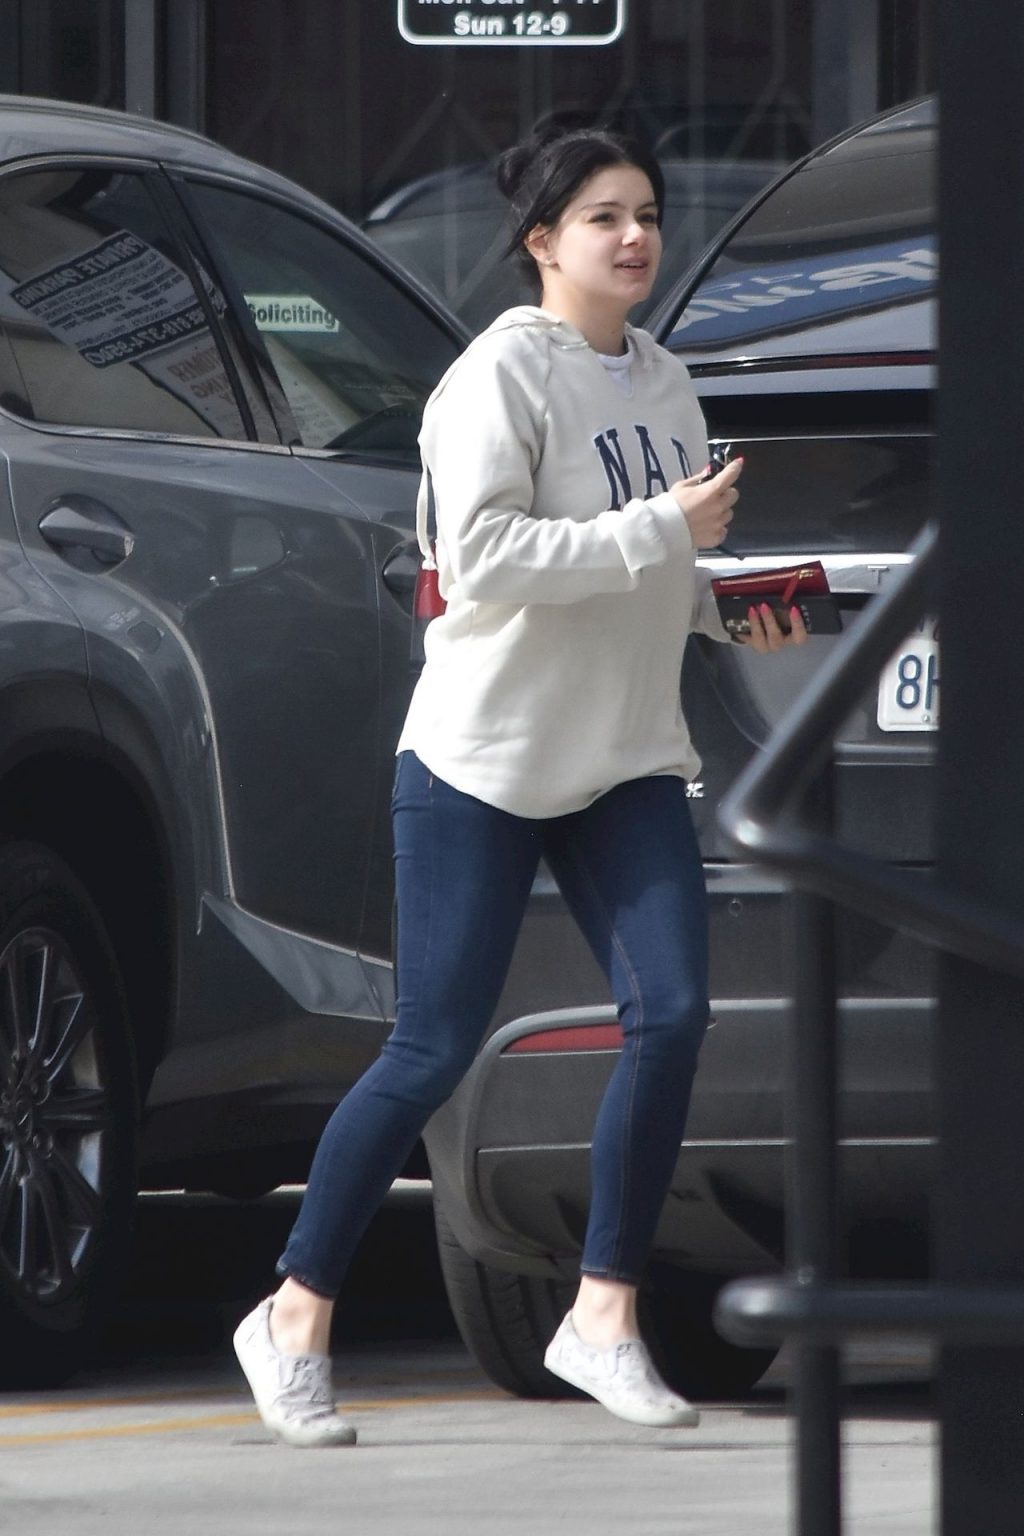 Ariel Winter Stocks Up on Cannabis and Groceries in Studio City (45 Sexy Photos)